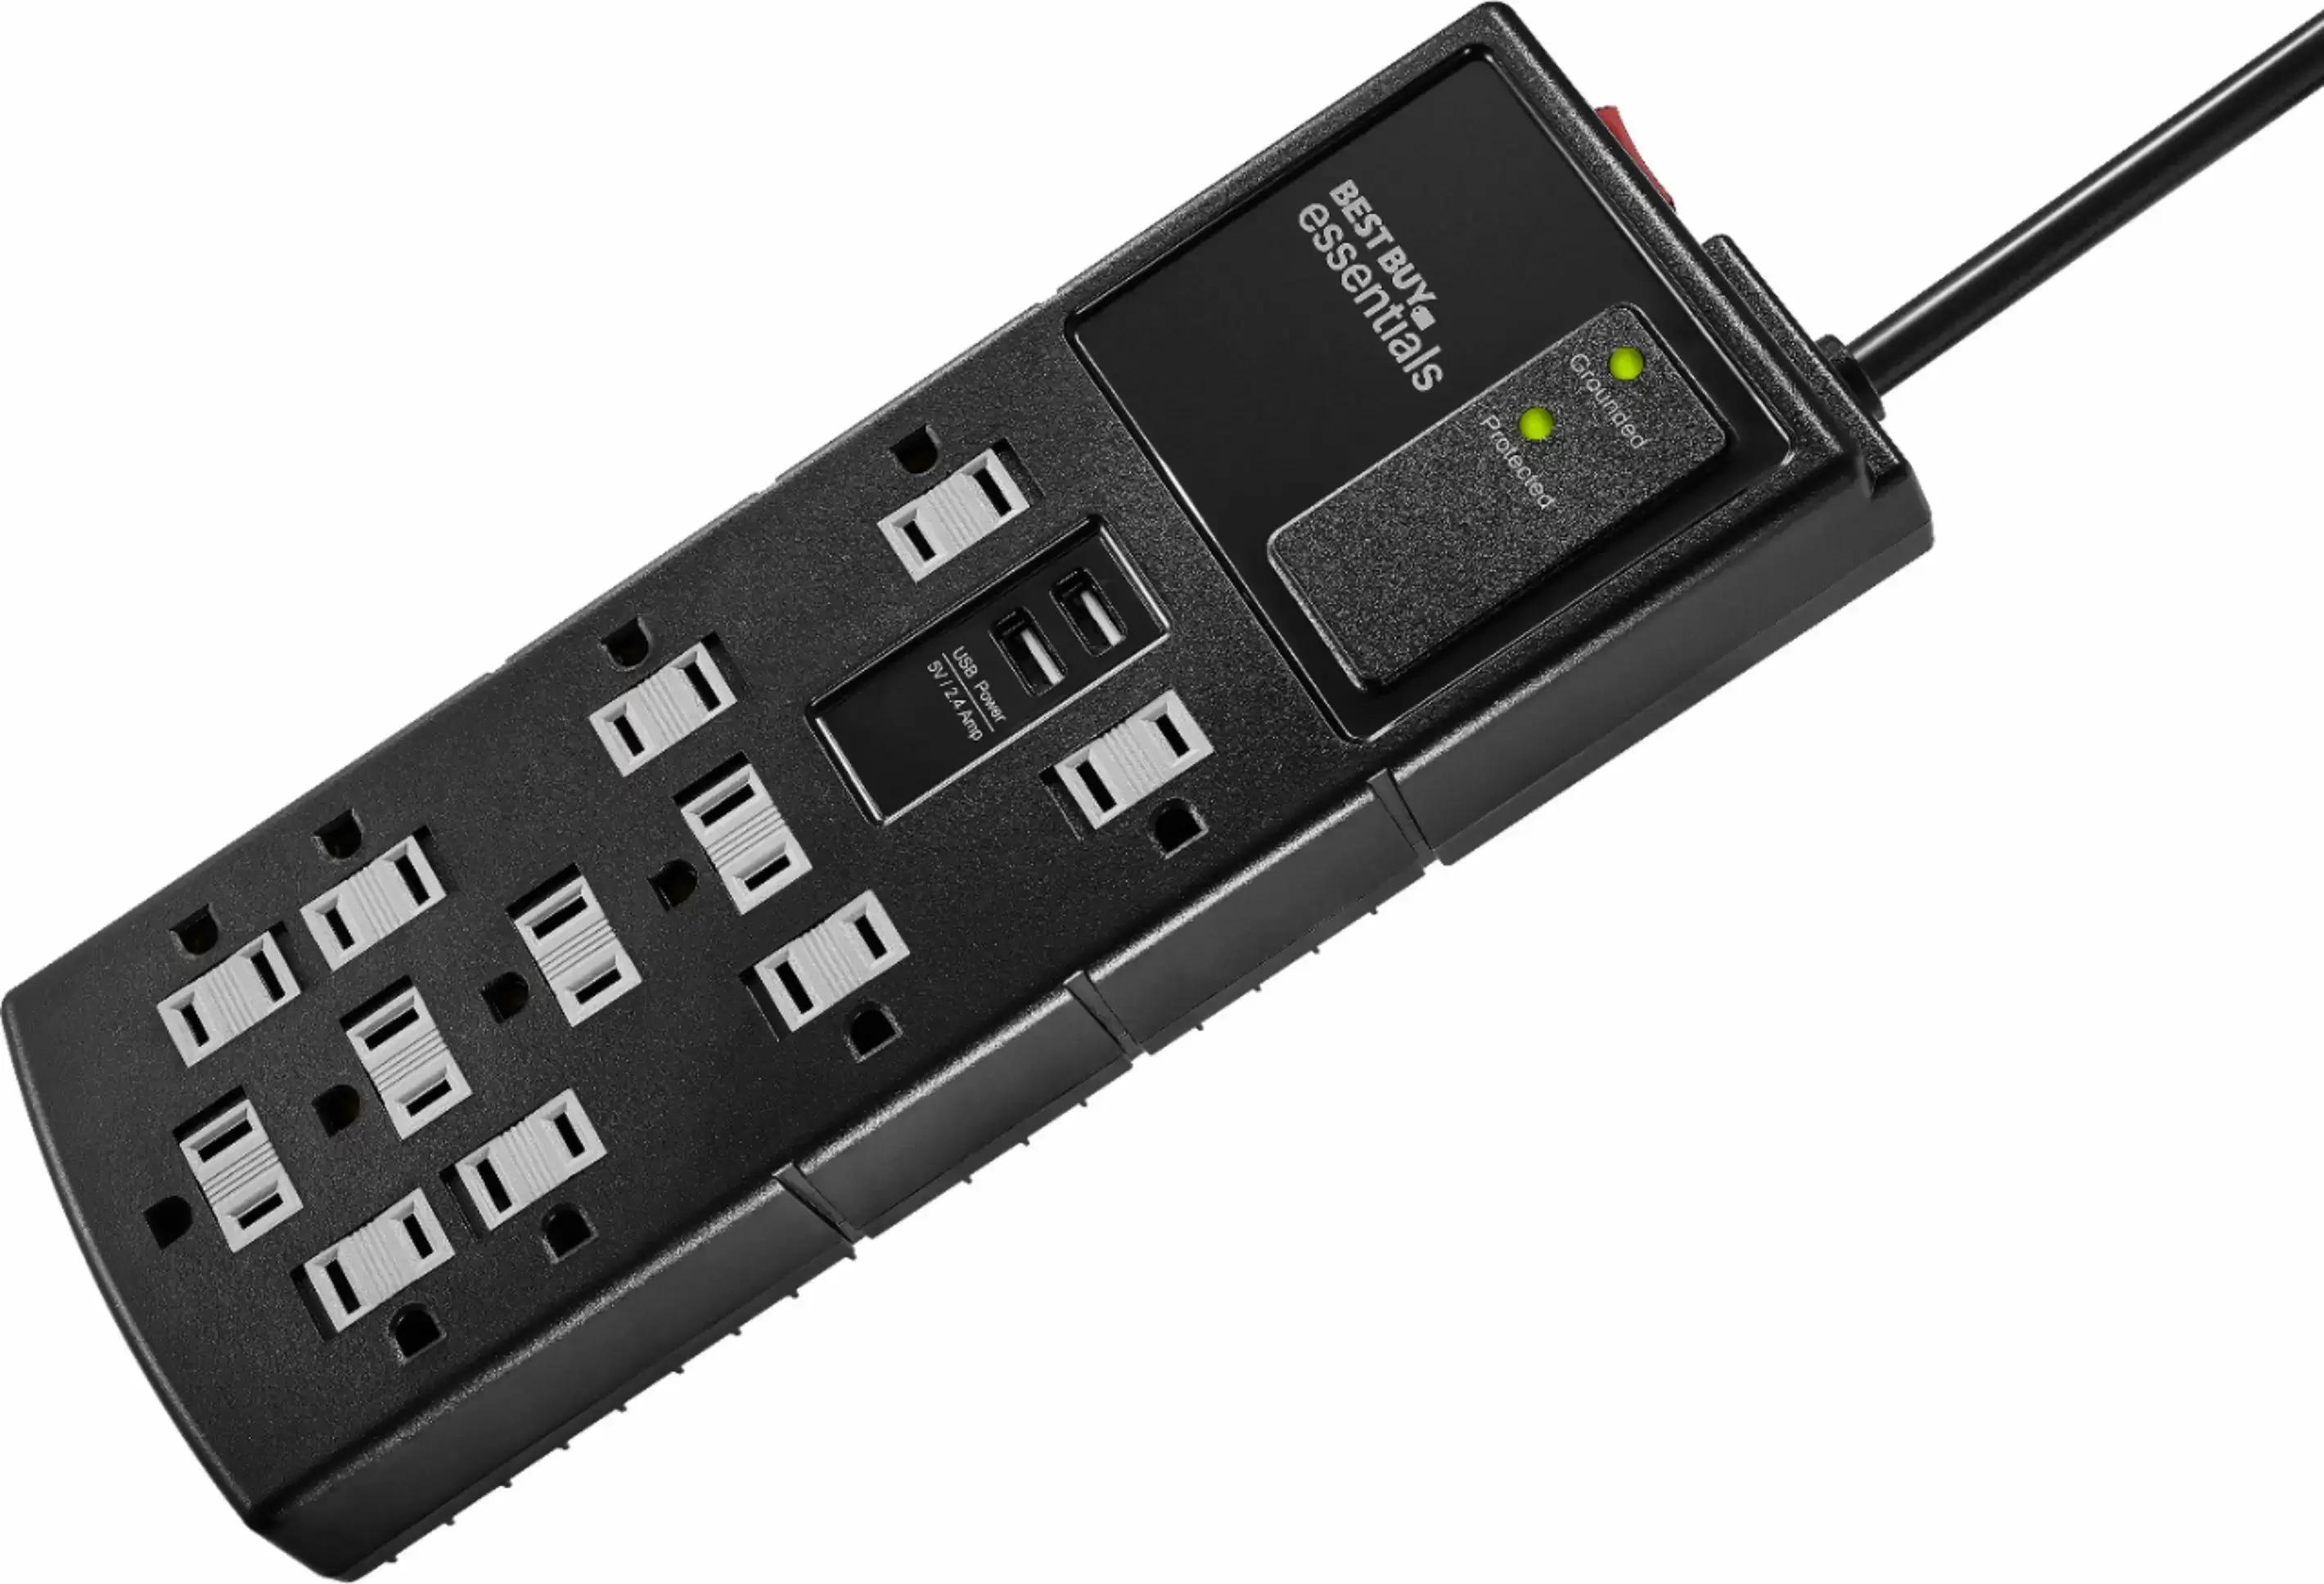 12-Outlet Essentials Surge Protector Strip for $8.99